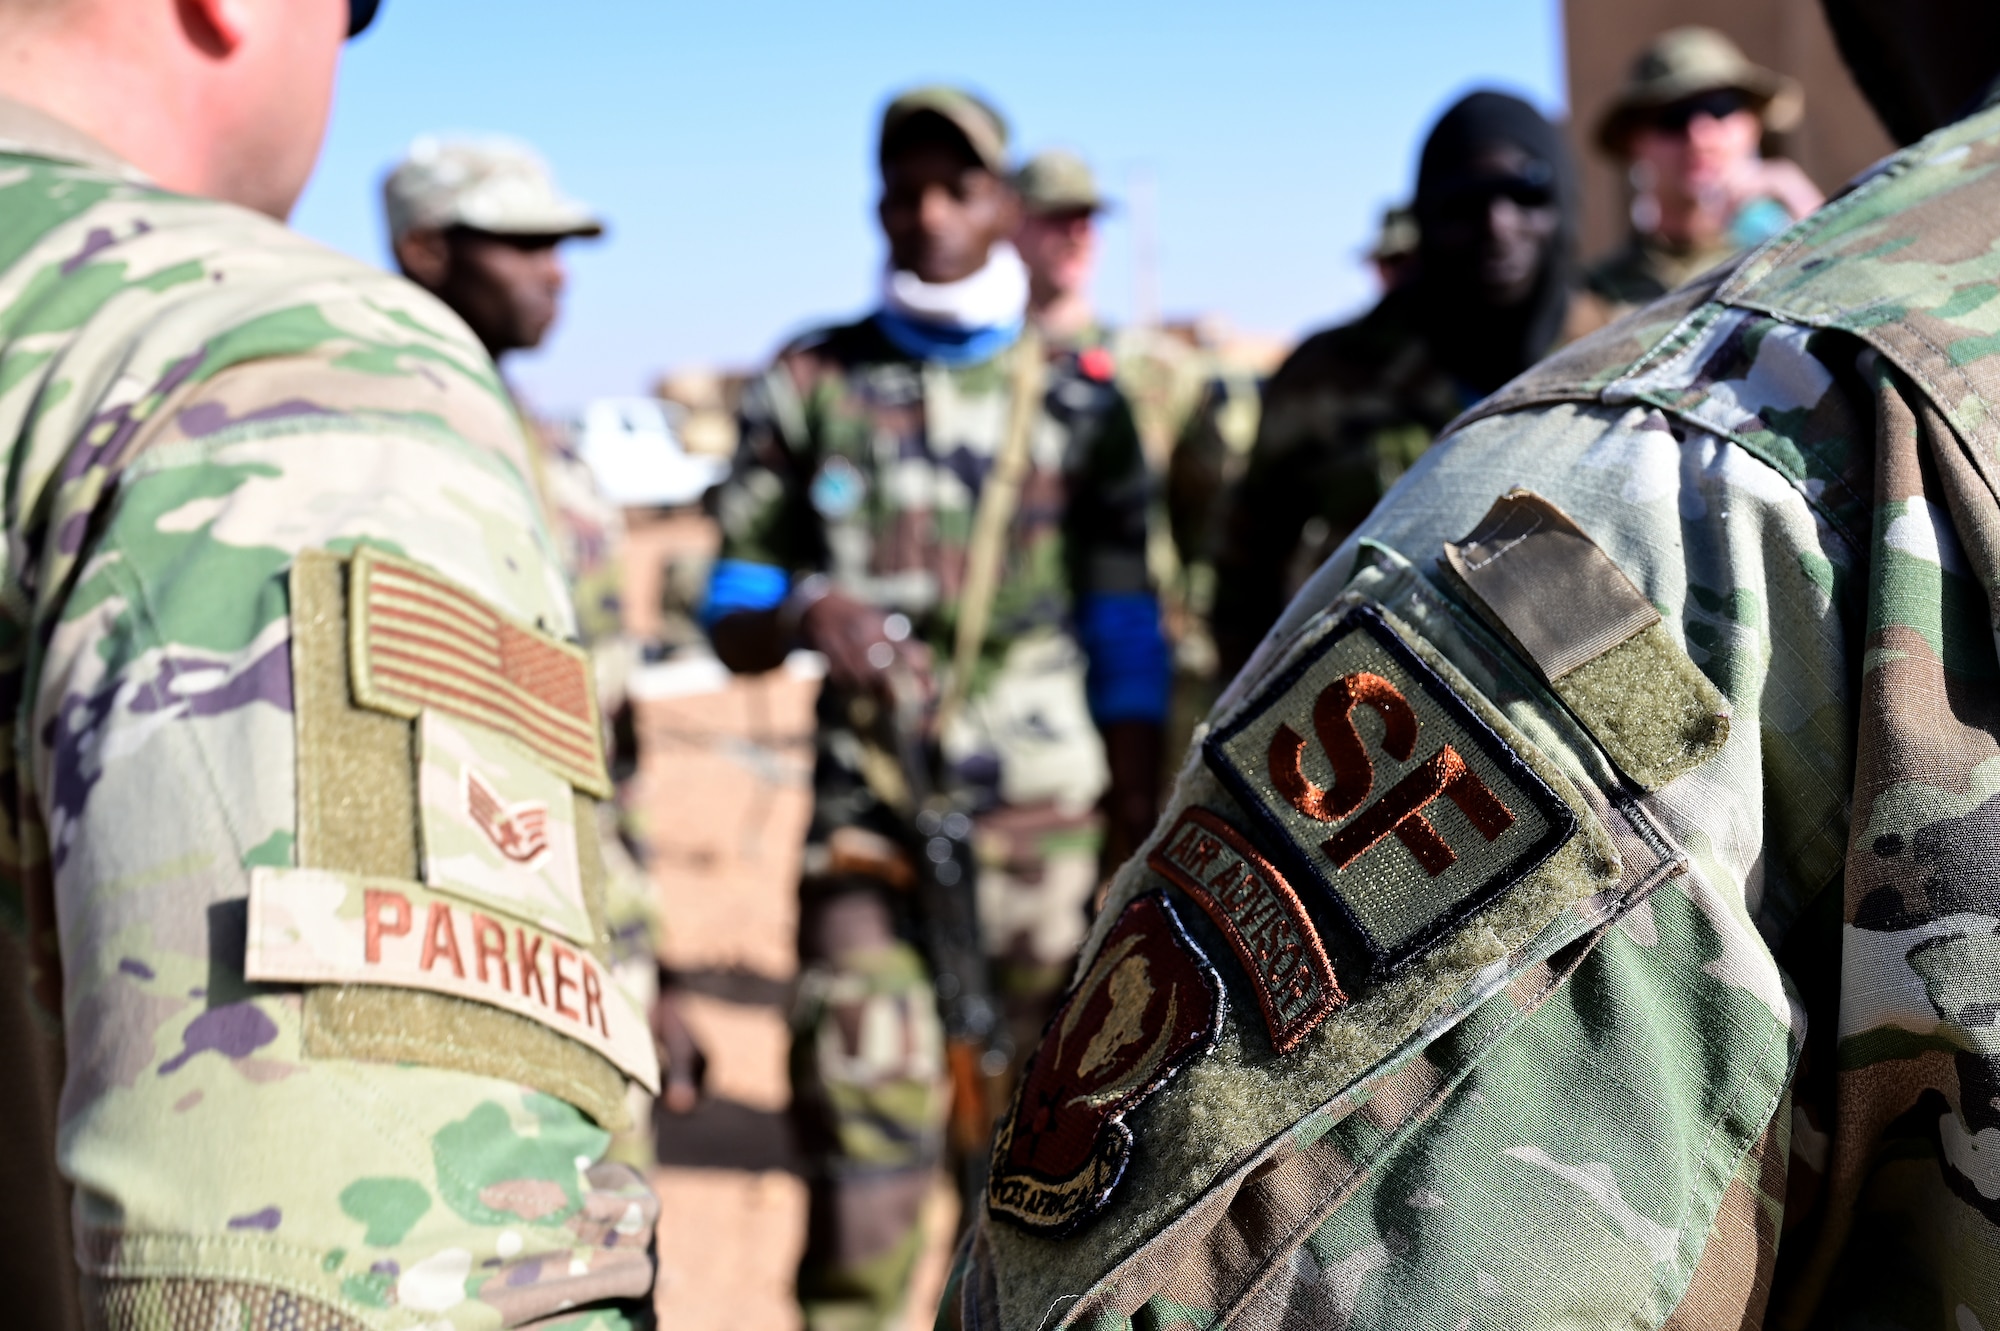 The 409th Expeditionary Security Forces Squadron air advisors provided training to the Nigerien Armed Forces (French language: Forces Armées Nigeriennes), at Nigerien Air Base 201, Agadez, Niger, Jan. 21, 2022 This training is part of an eight-week course, where 30 FAN members trained on various tactics to help strengthen their defense capabilities and counter-transnational threats. (U.S. Air Force photo by Tech. Sgt. Stephanie Longoria)